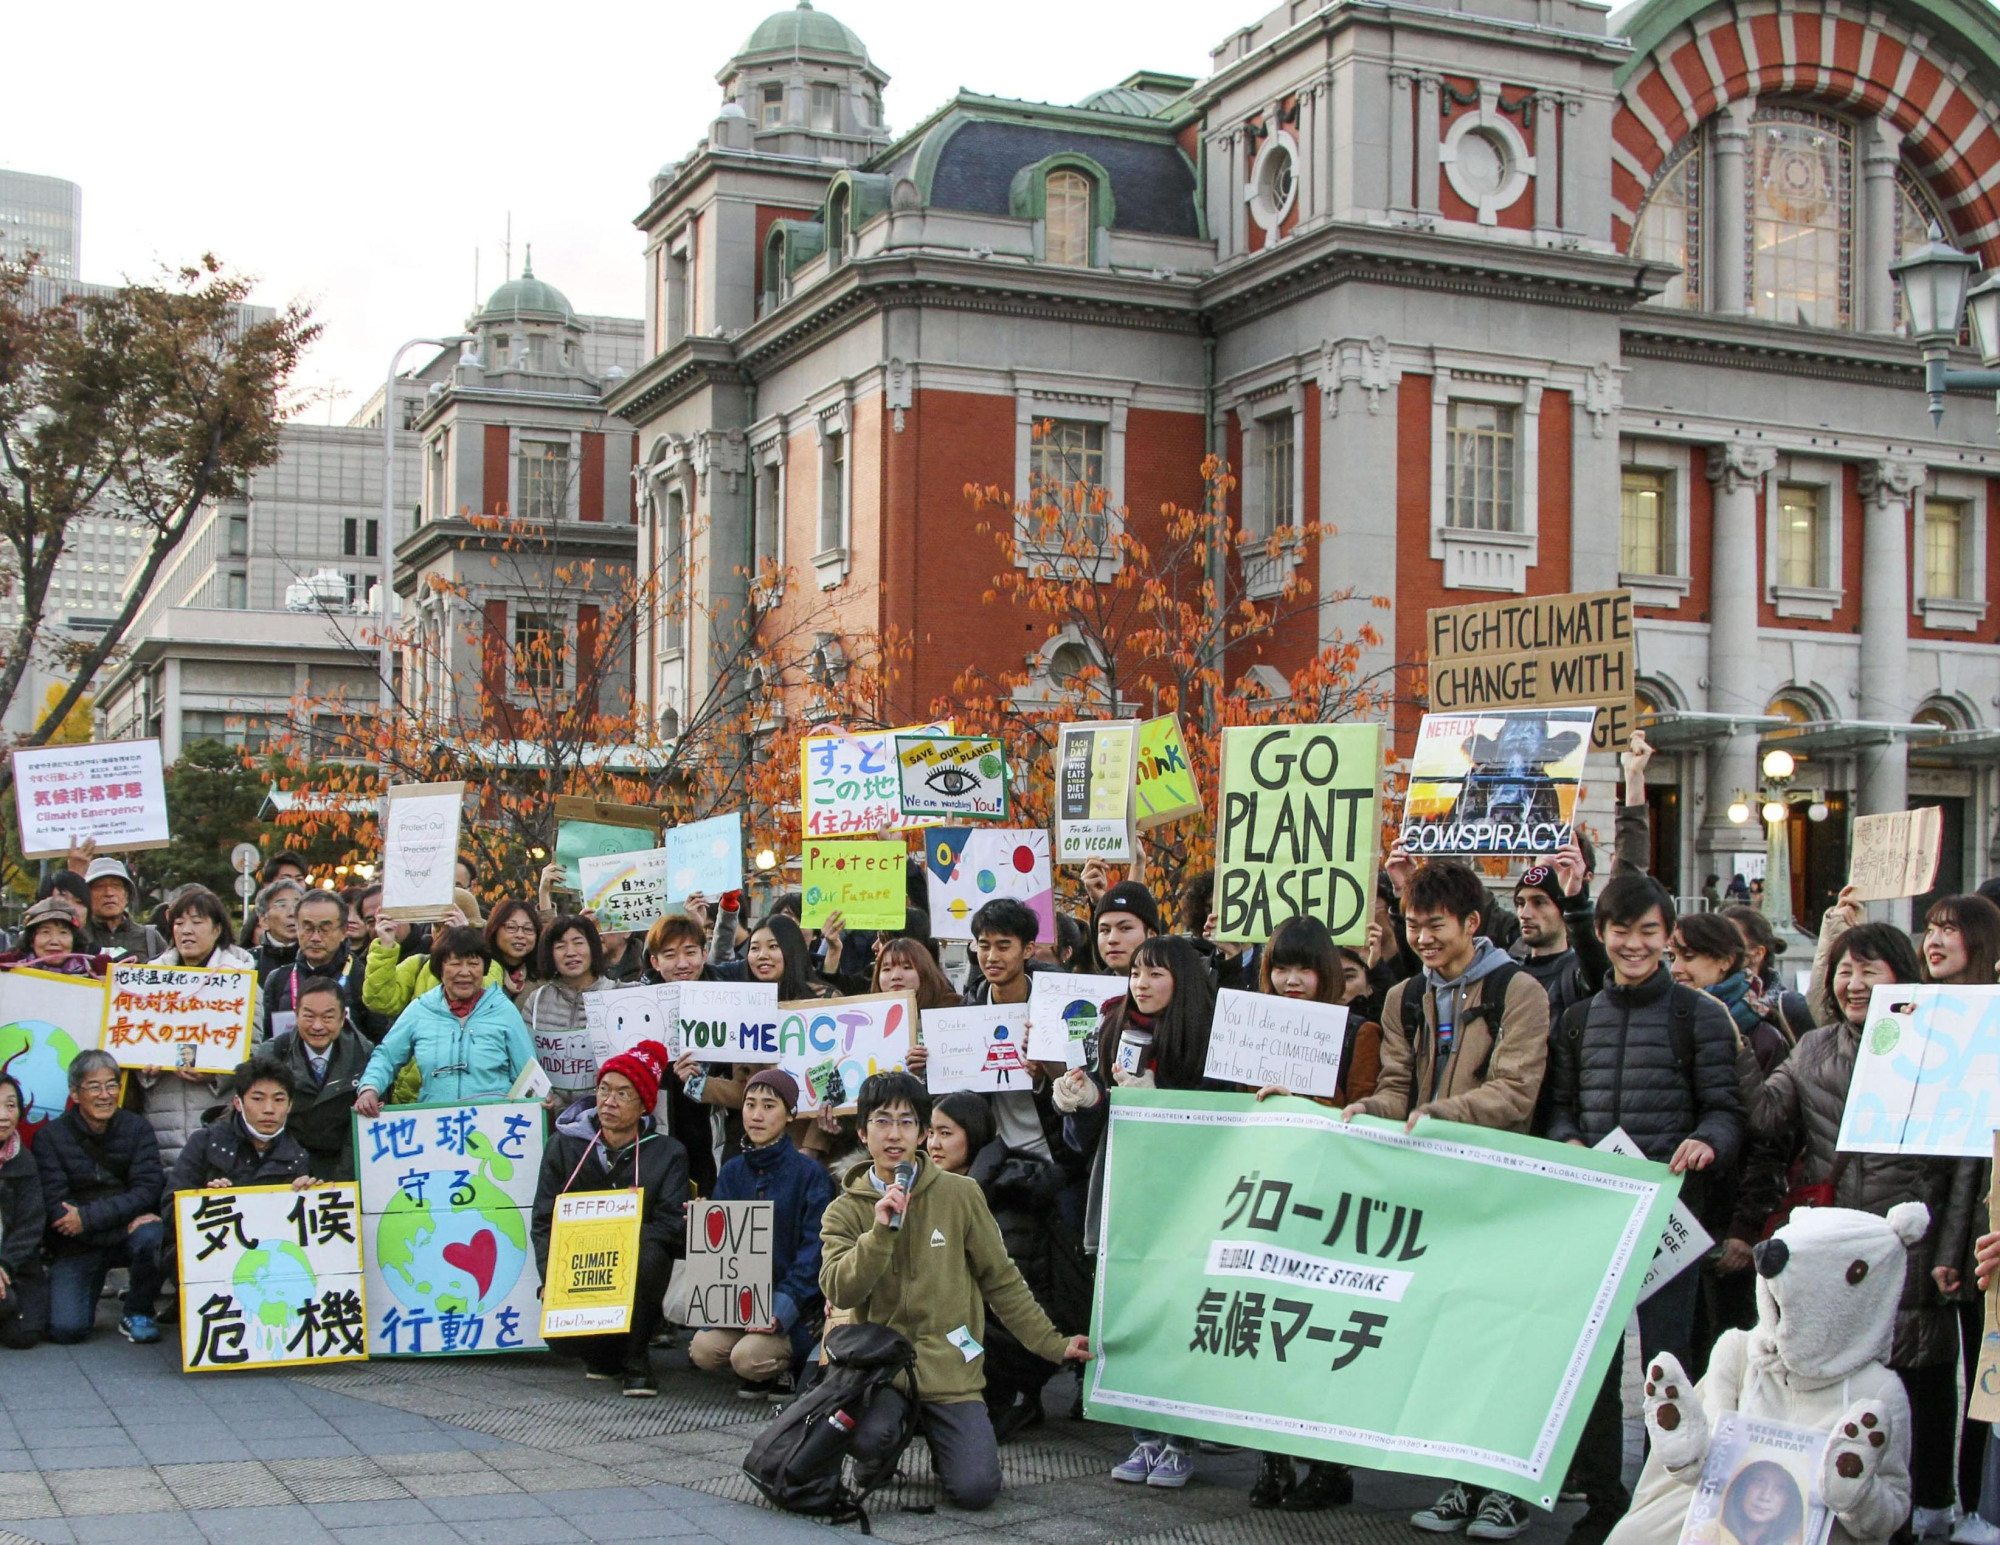 Protesters take part in a march in the city of Osaka on Friday, during which they urged the government to take steps to mitigate climate change. The event was part of a worldwide climate strike held the same day, a run-up to the COP 25 climate conference which begins in Madrid on Monday. | KYODO